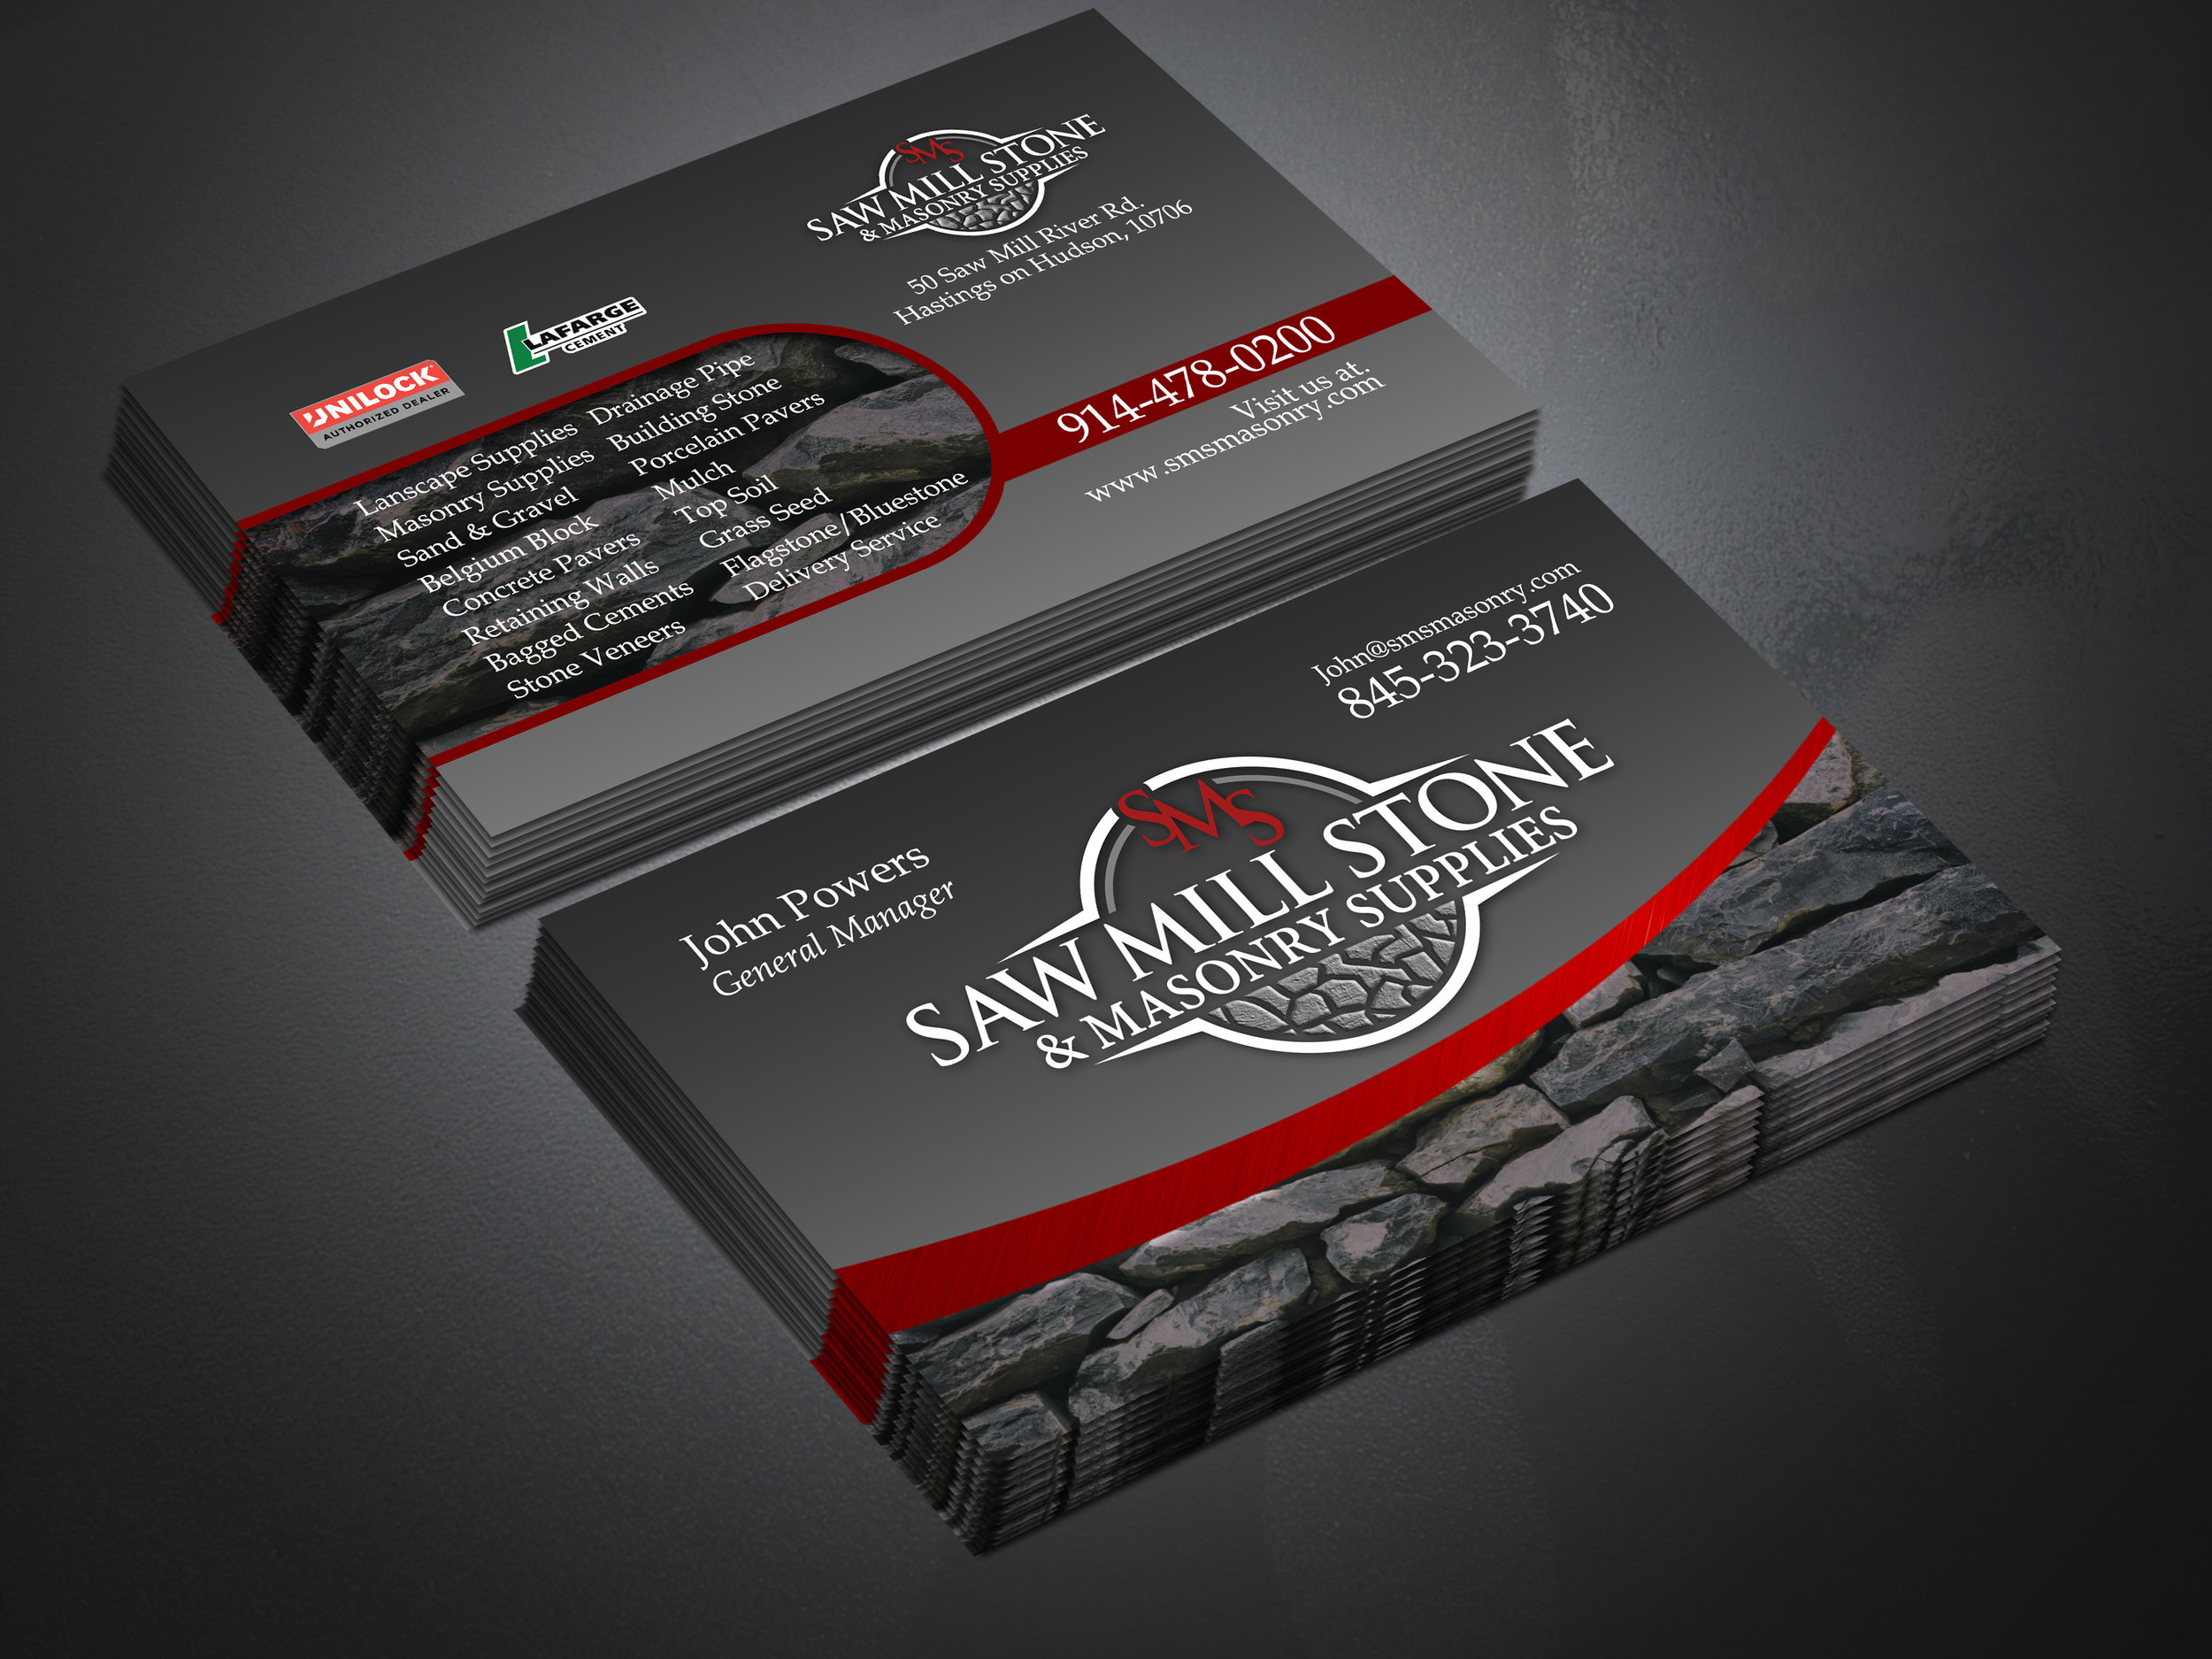 Saw Mill Stone Business Card Design Hastings on Hudson, NY.jpg